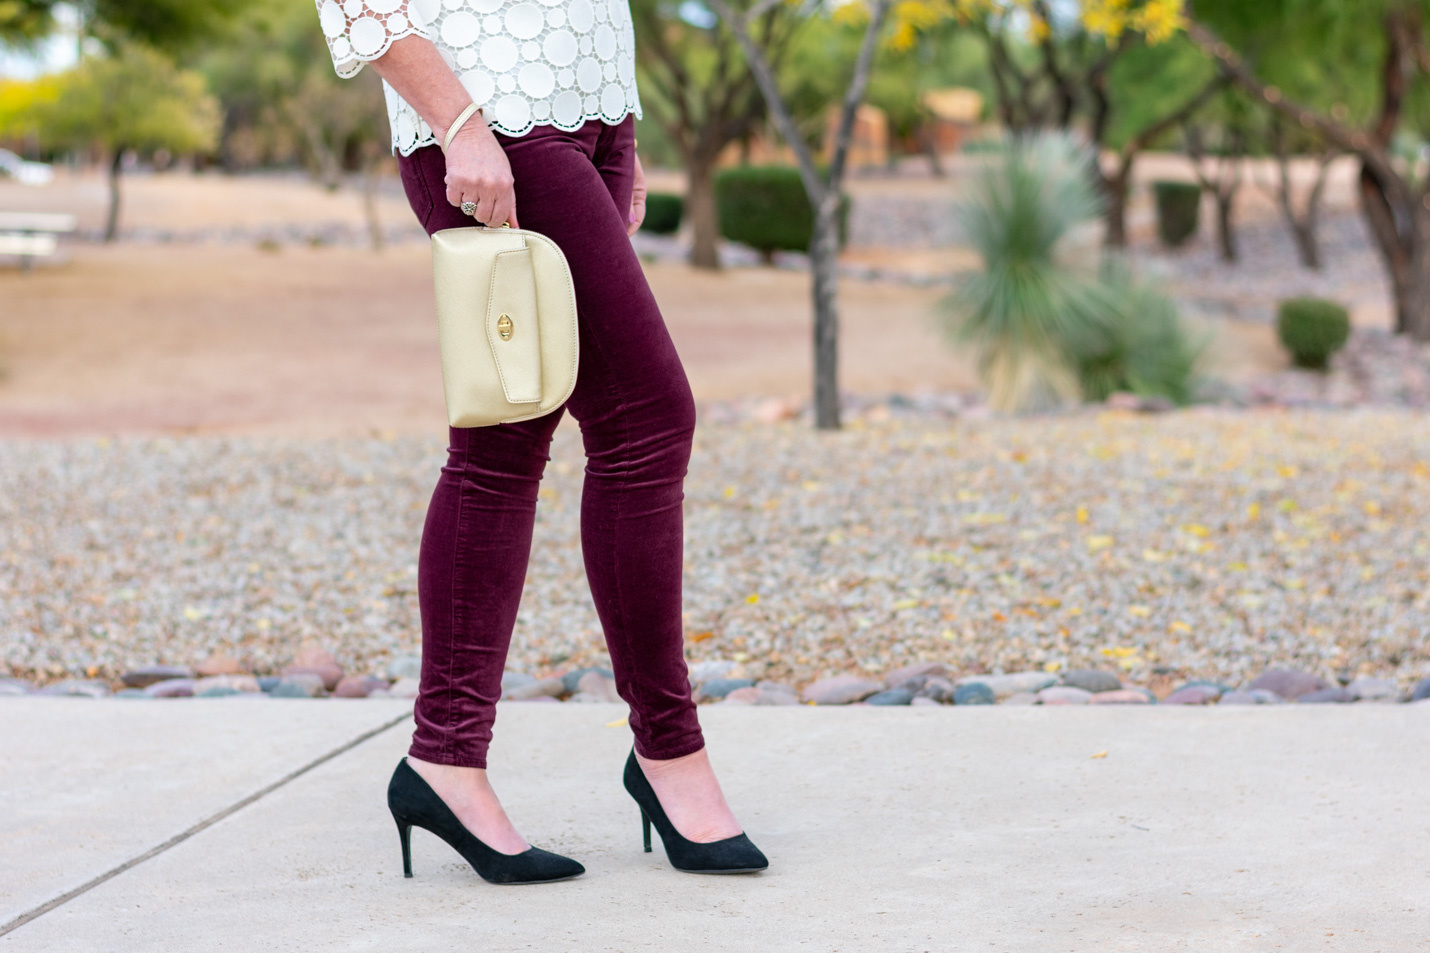 Velvet Jeans + Lace Top for Holiday Party